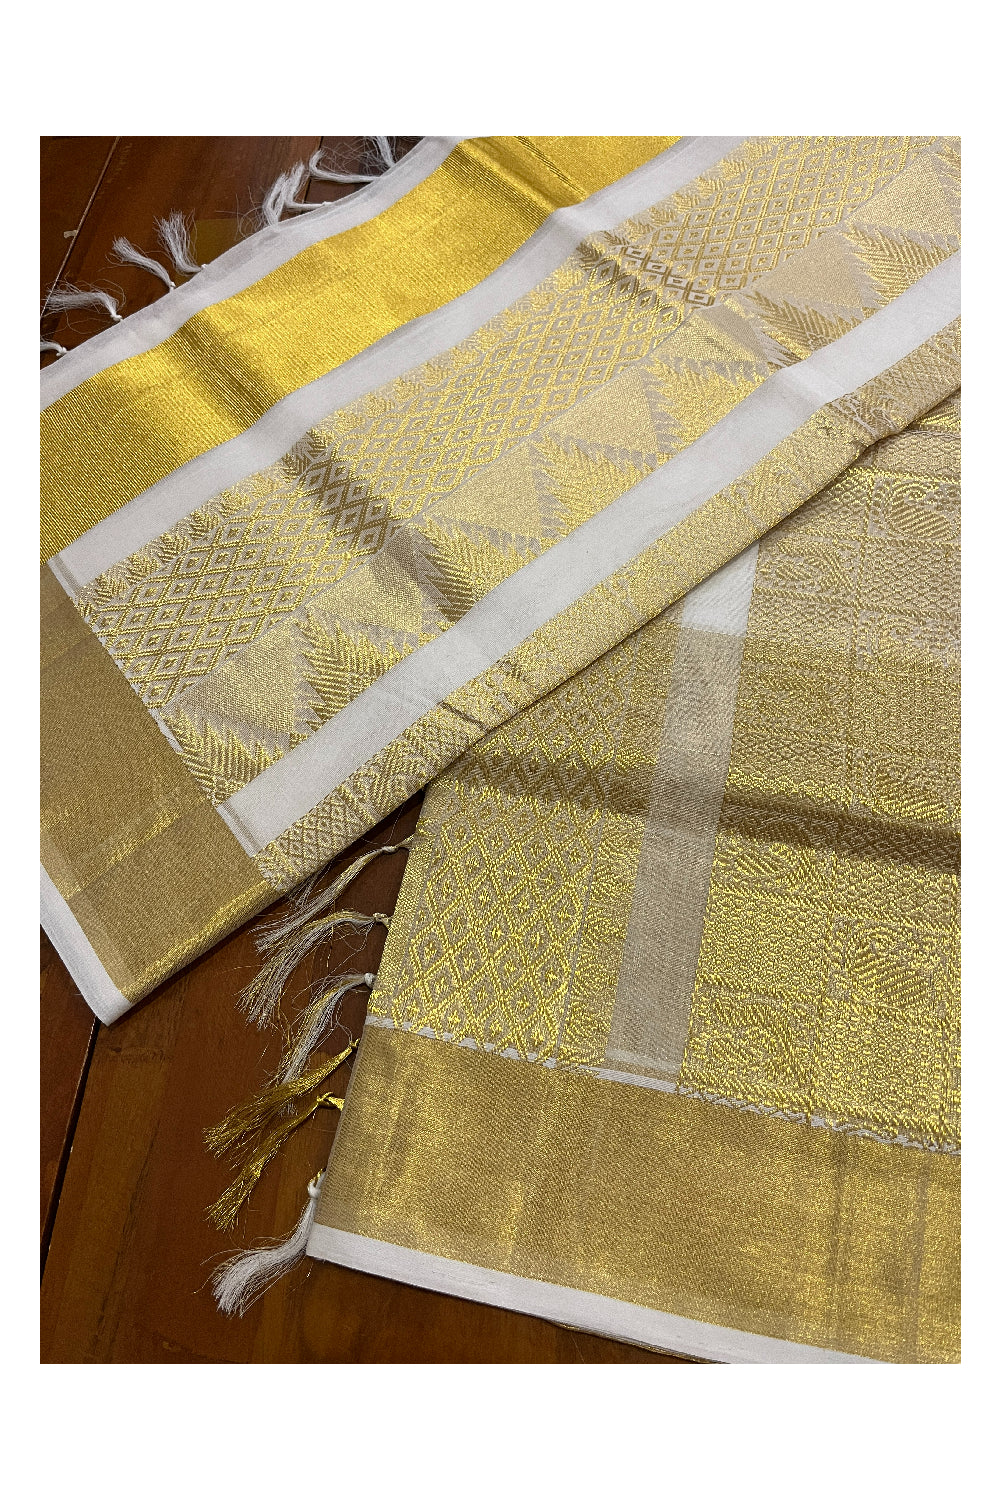 Southloom Premium Handloom Cotton Saree with Heavy Woven Works on Body